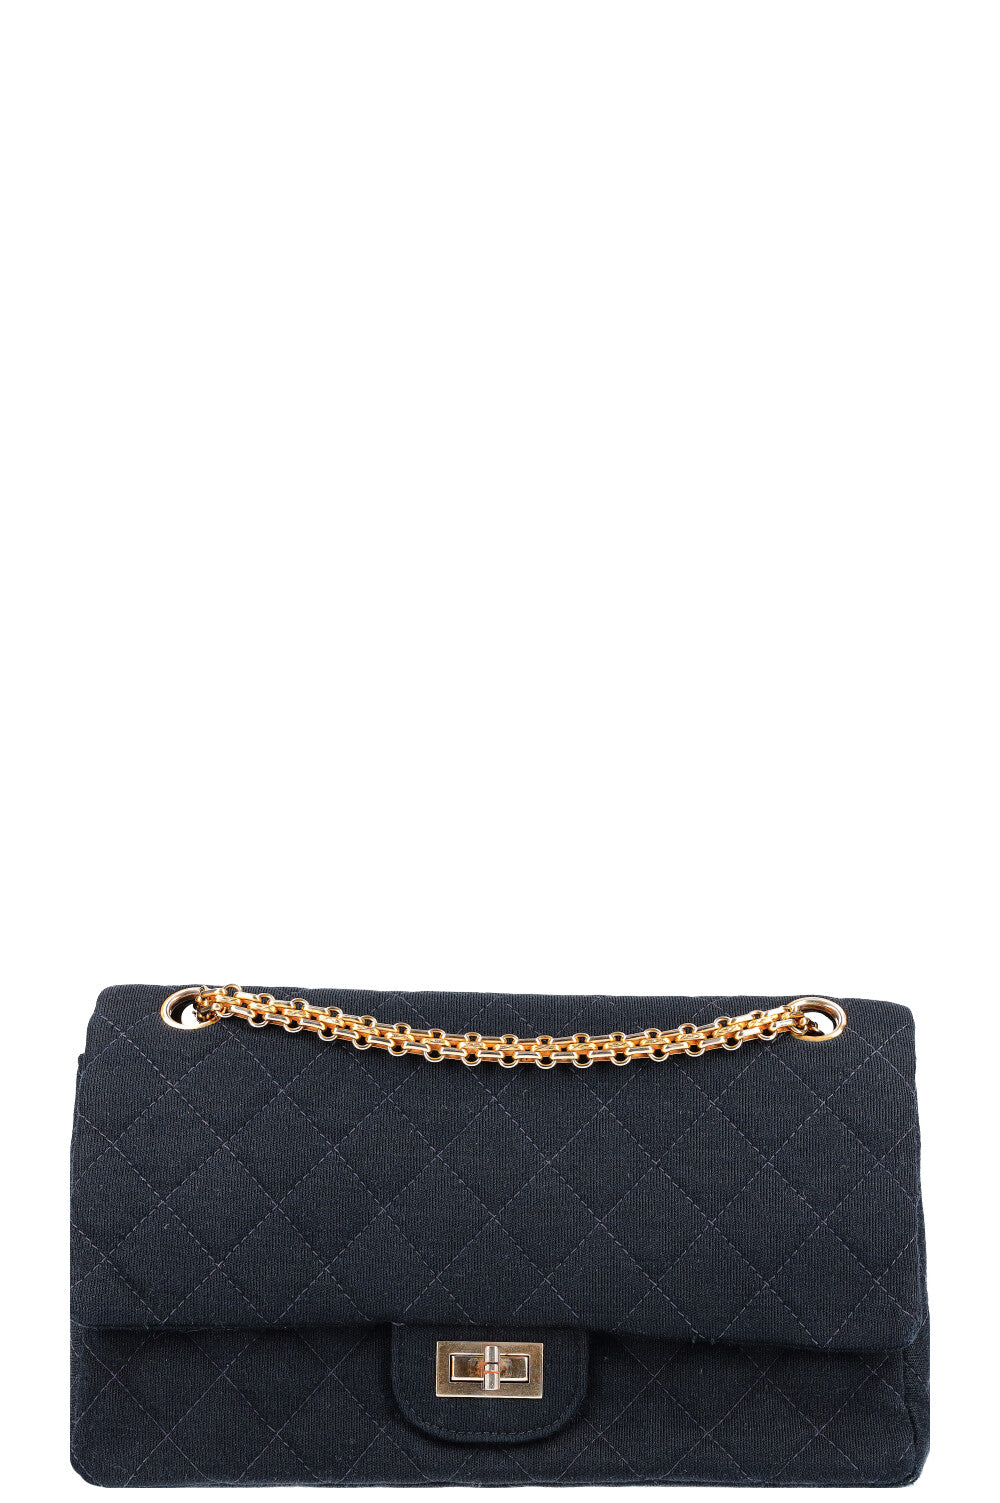 CHANEL Vintage 2.55 Double Flap Bag Jersey Navy